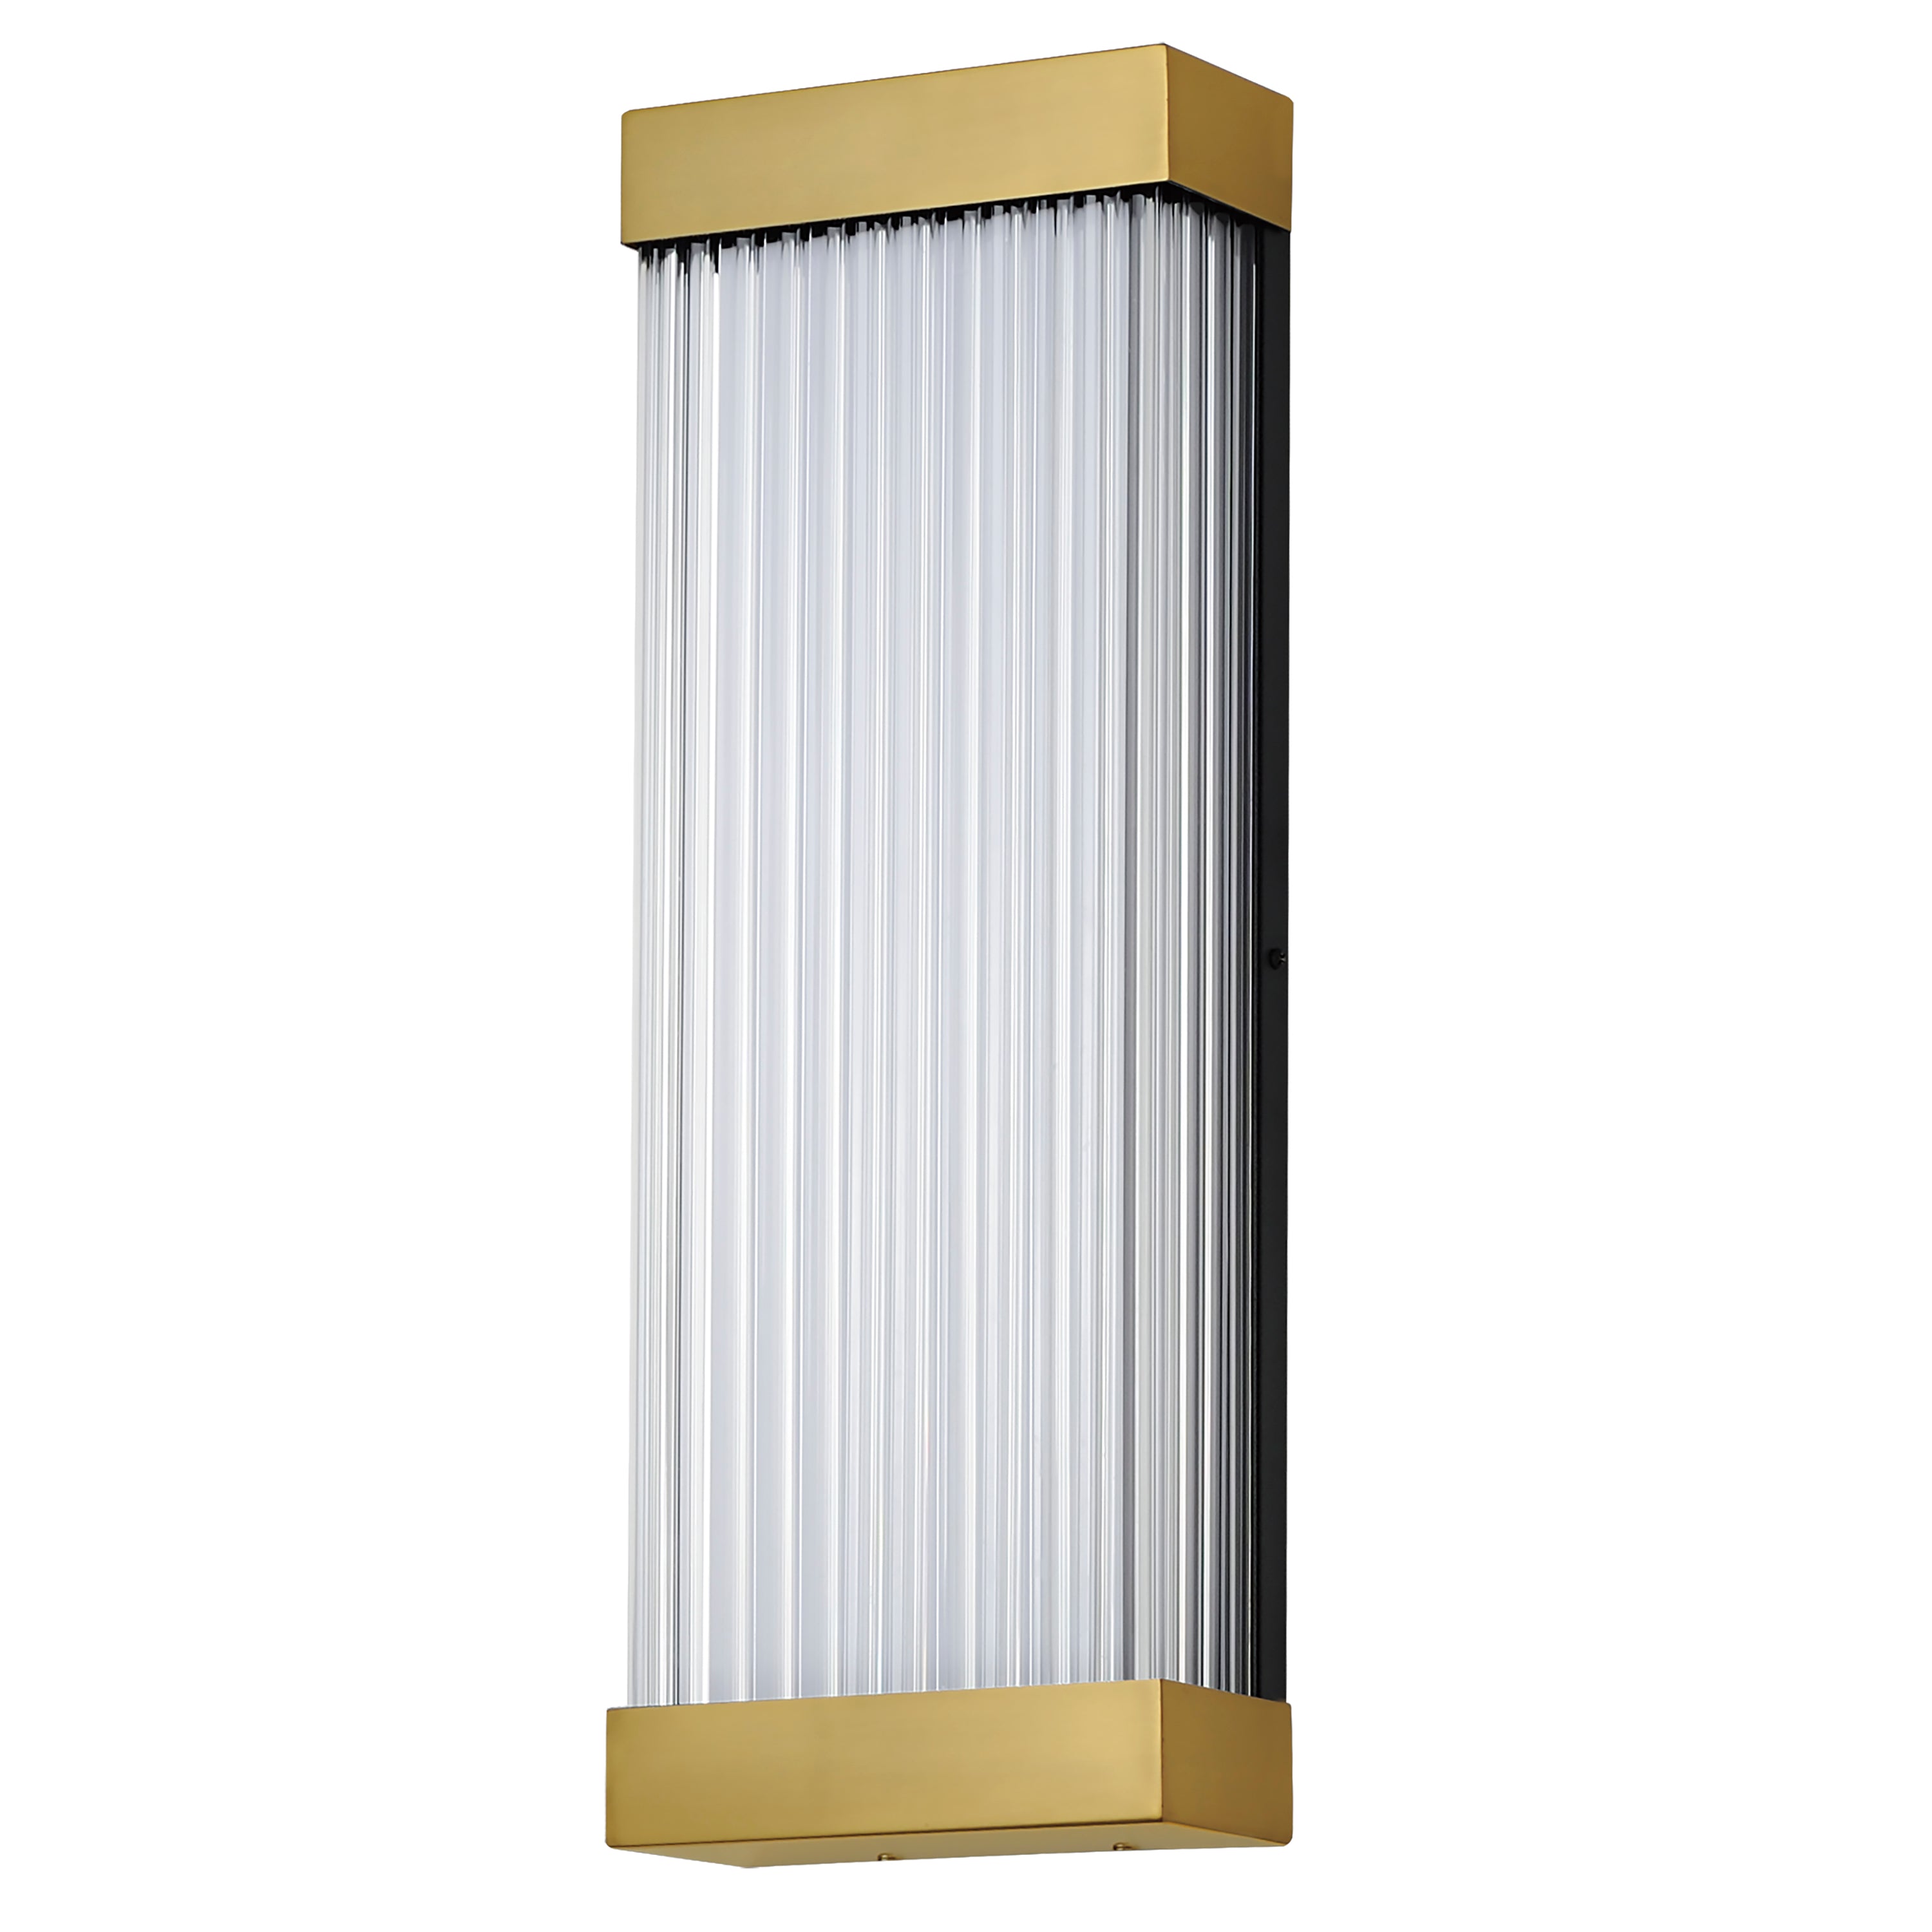 Acropolis-Outdoor Wall Mount Outdoor l Wall ET2 x8x22 Natural Aged Brass 